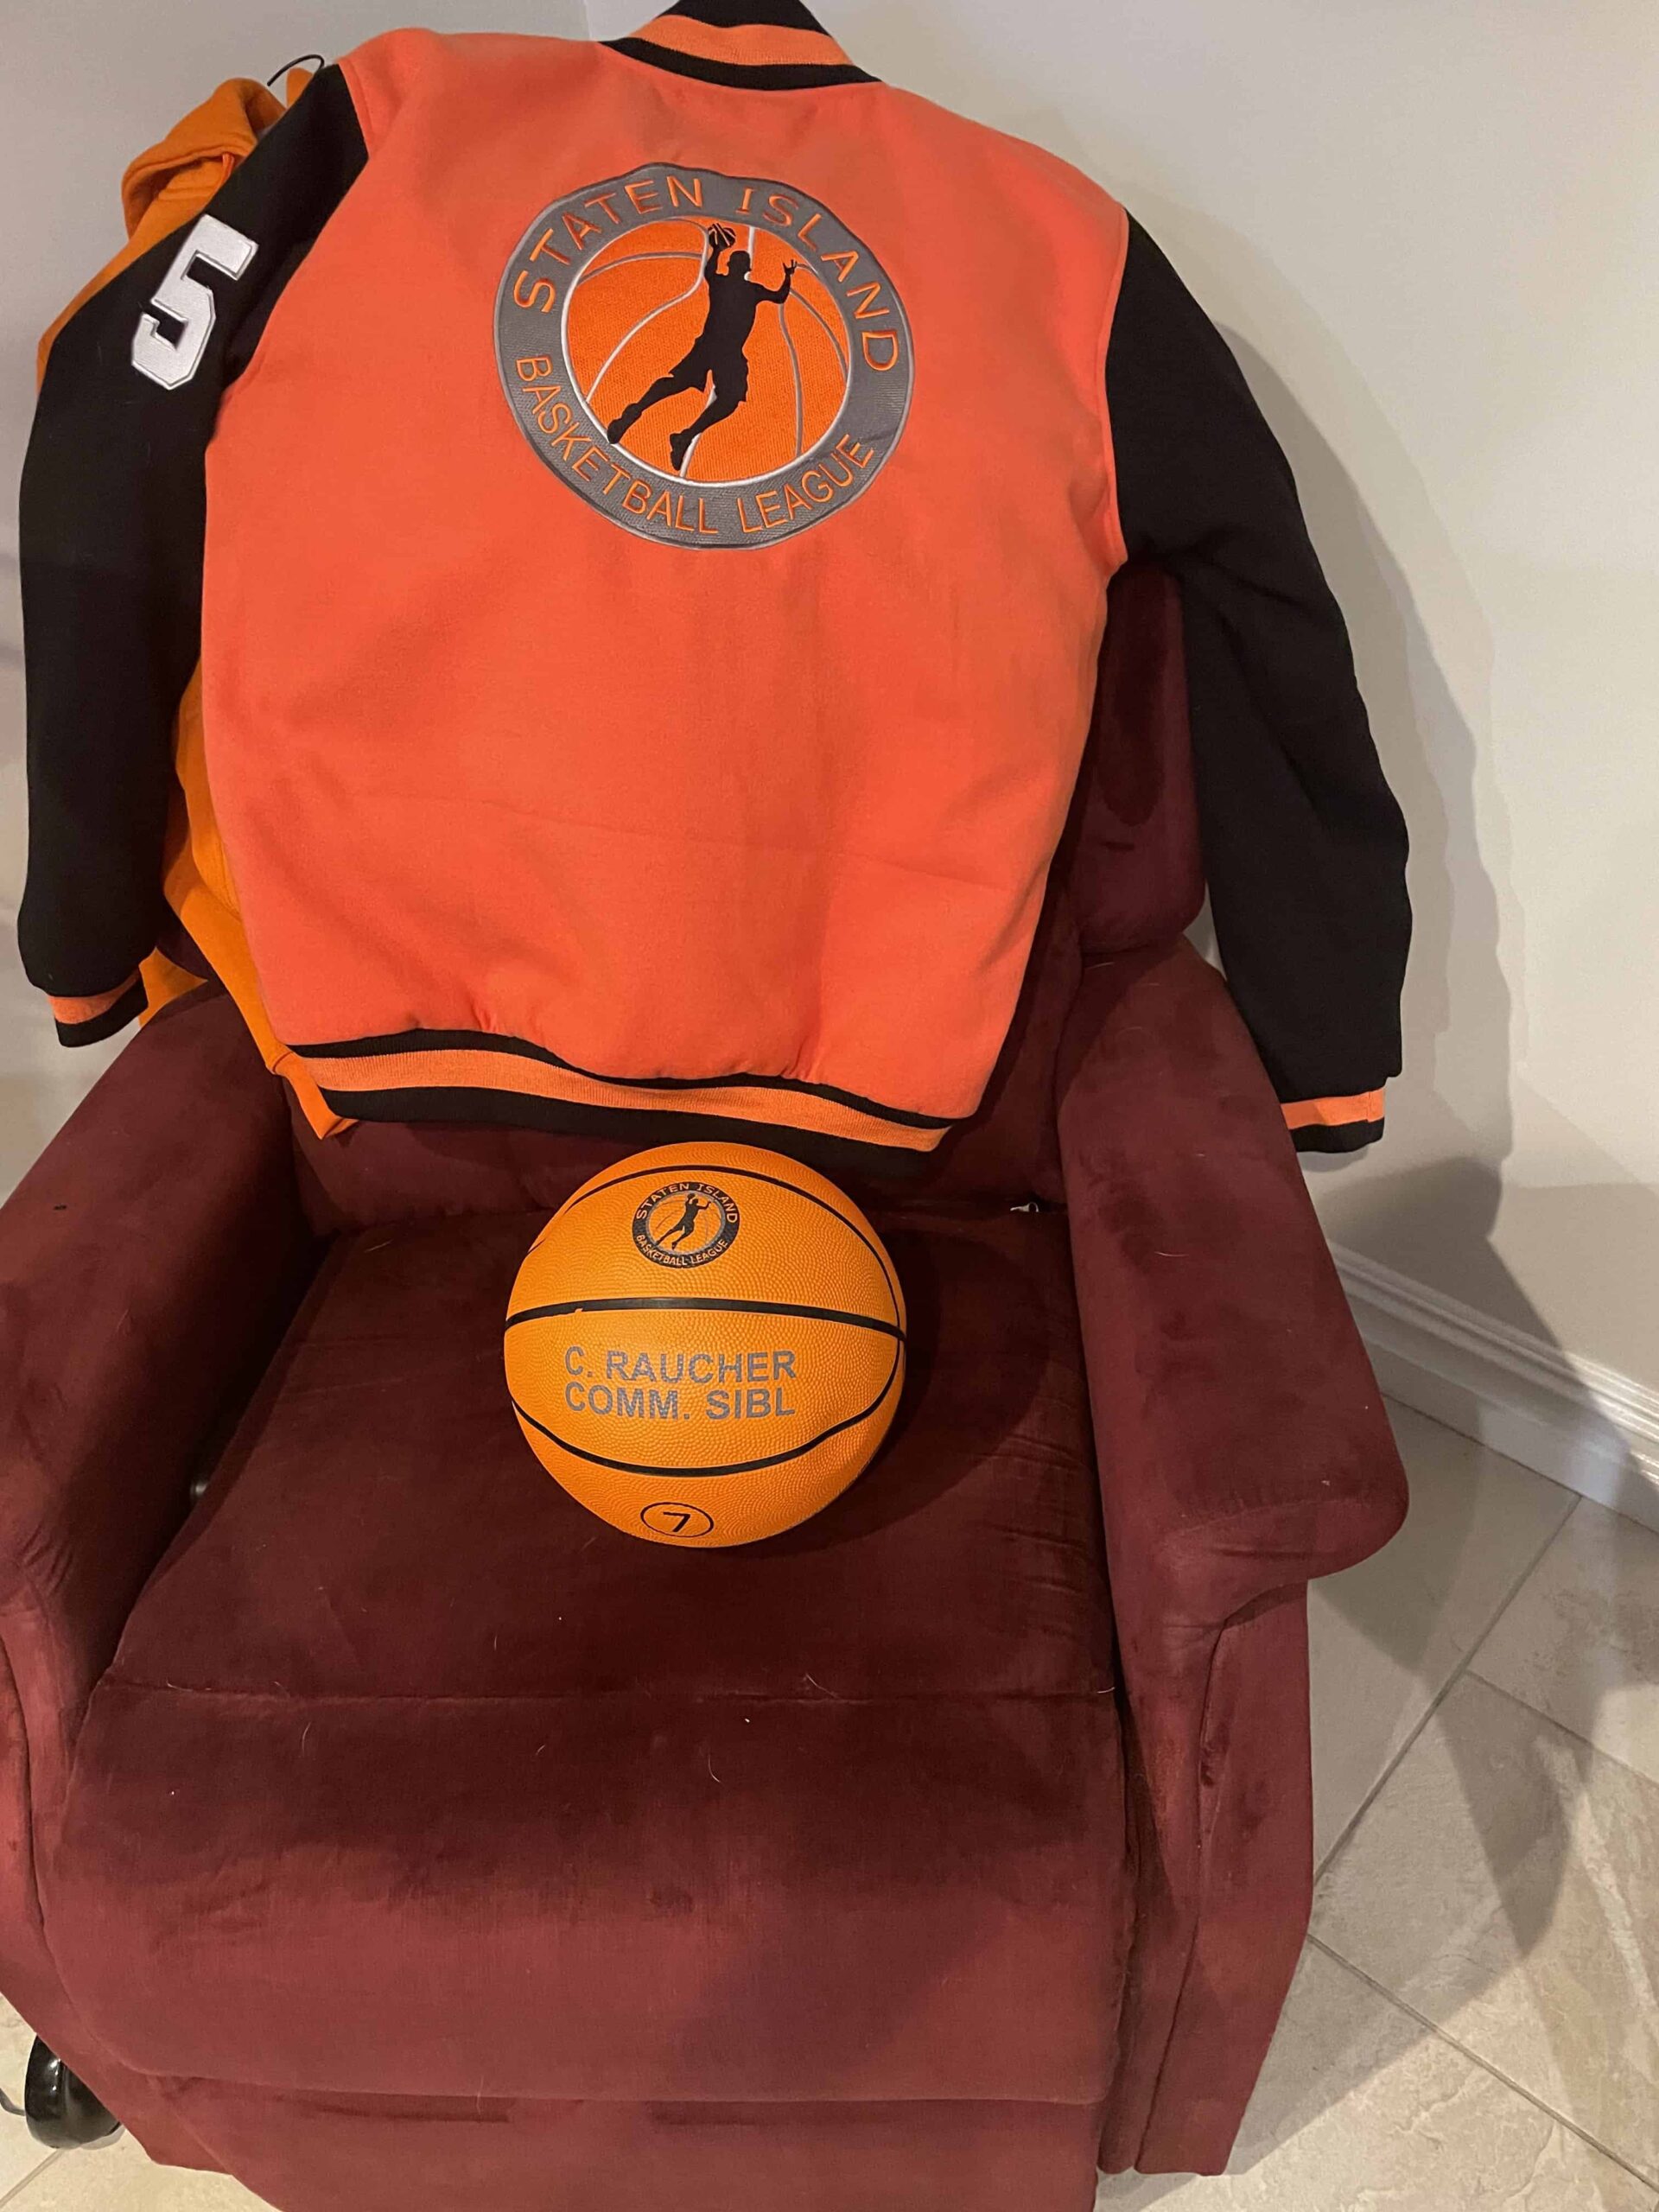 New SIBL team jacket and league basketball Spring 2023